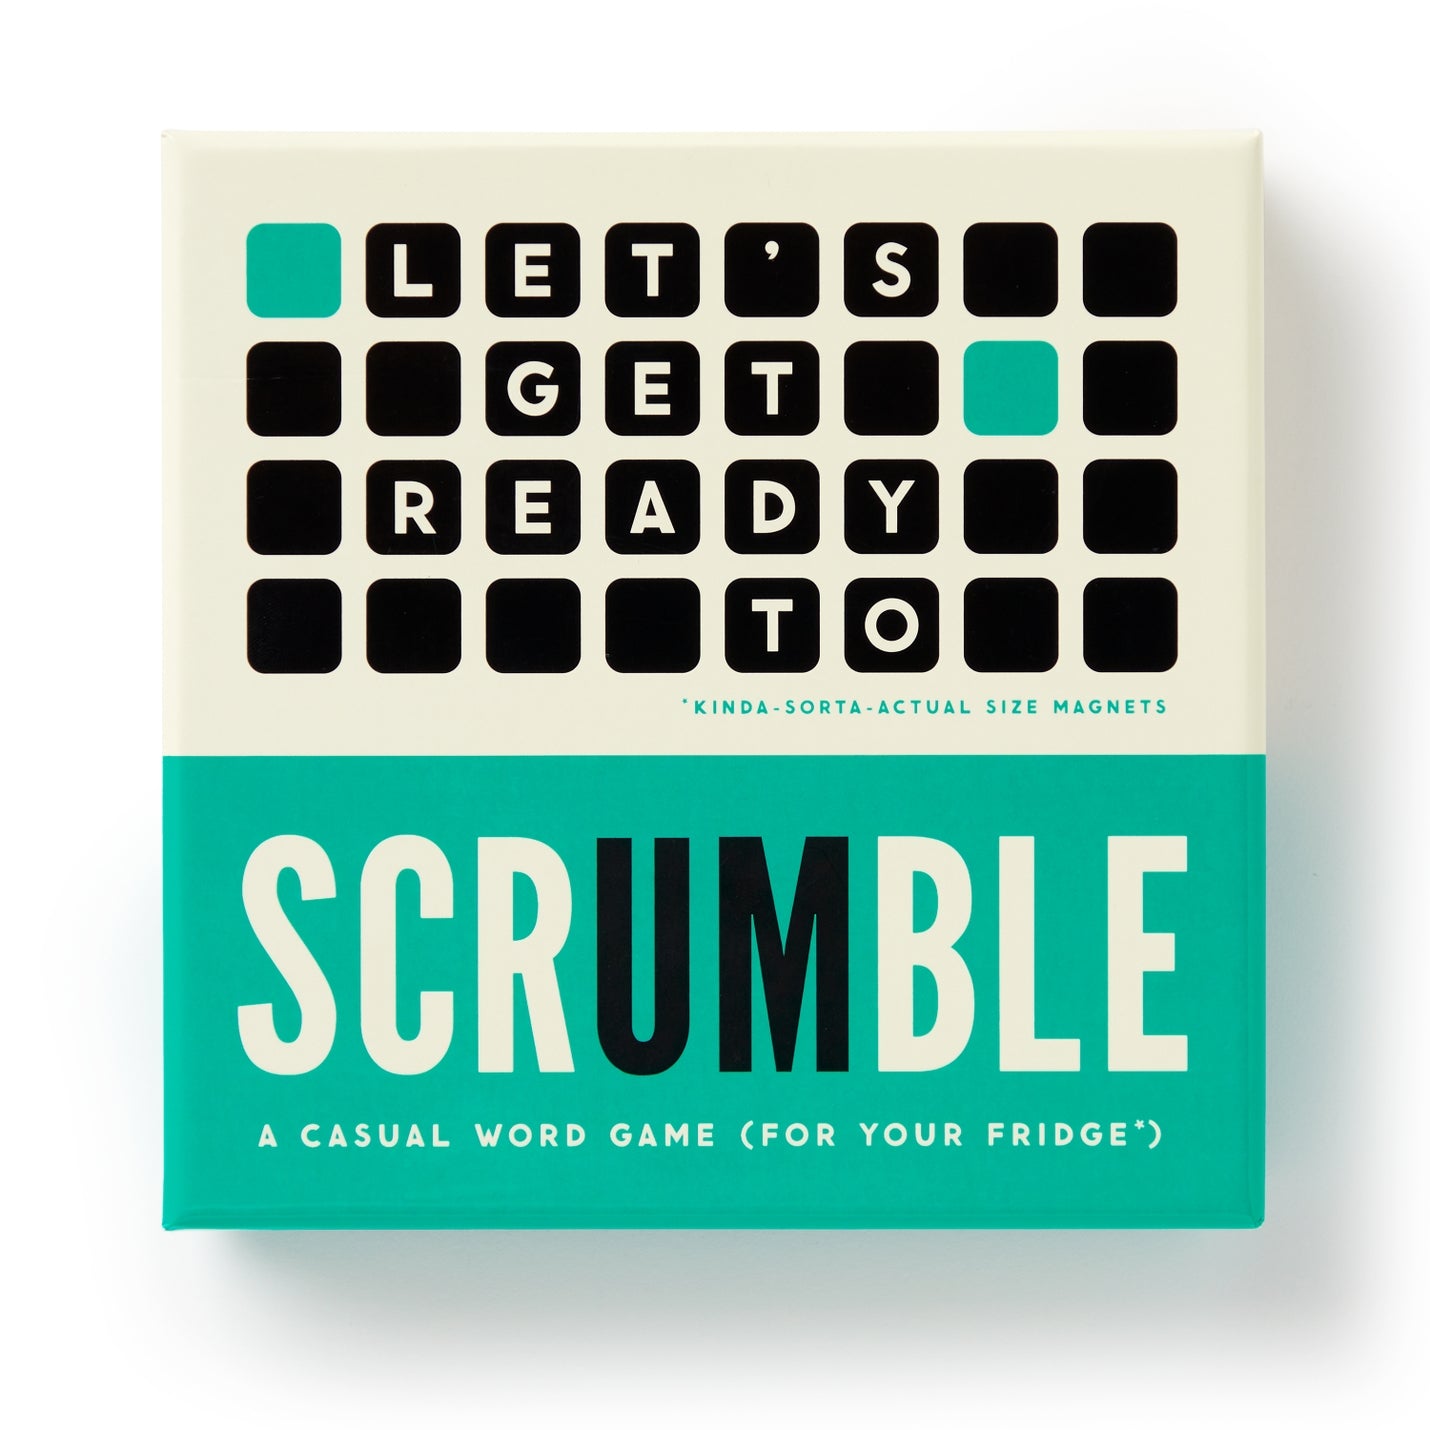 Scrumble: A Casual Word Game (For Your Fridge)